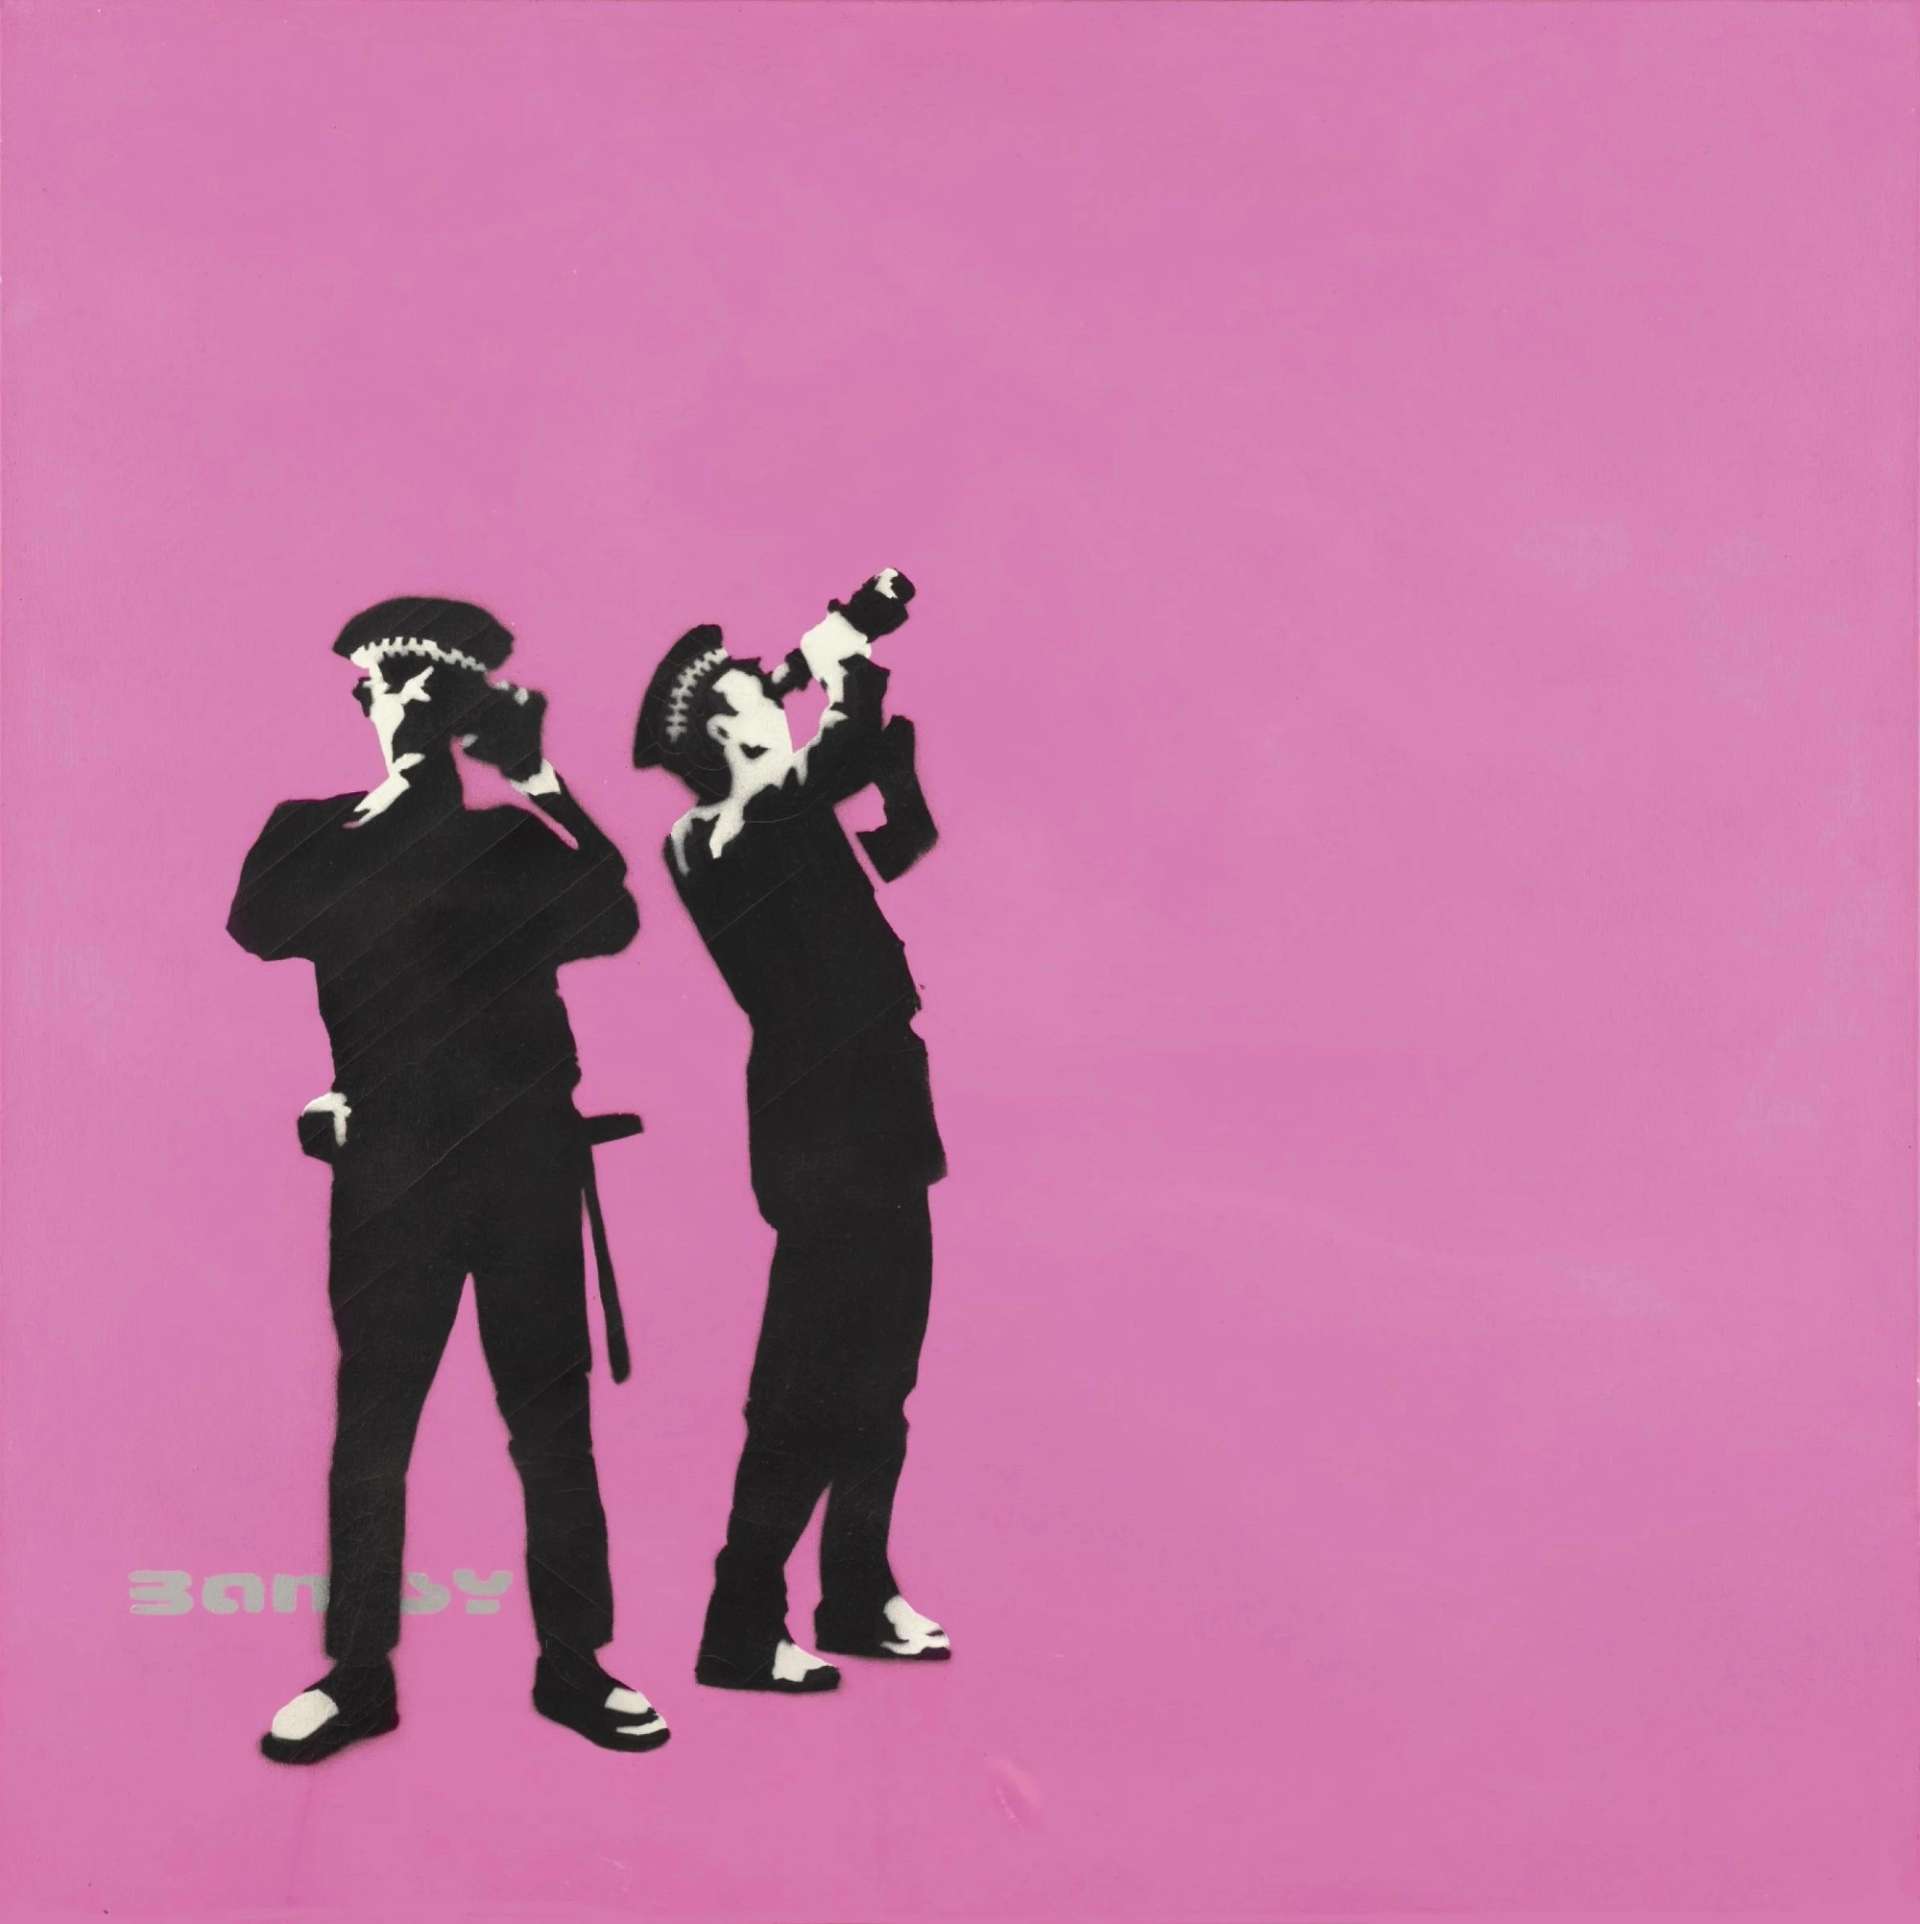 Banksy's Avon And Somerset Constabulary (pink). Two policeman standing holding up binoculars against a pink background.